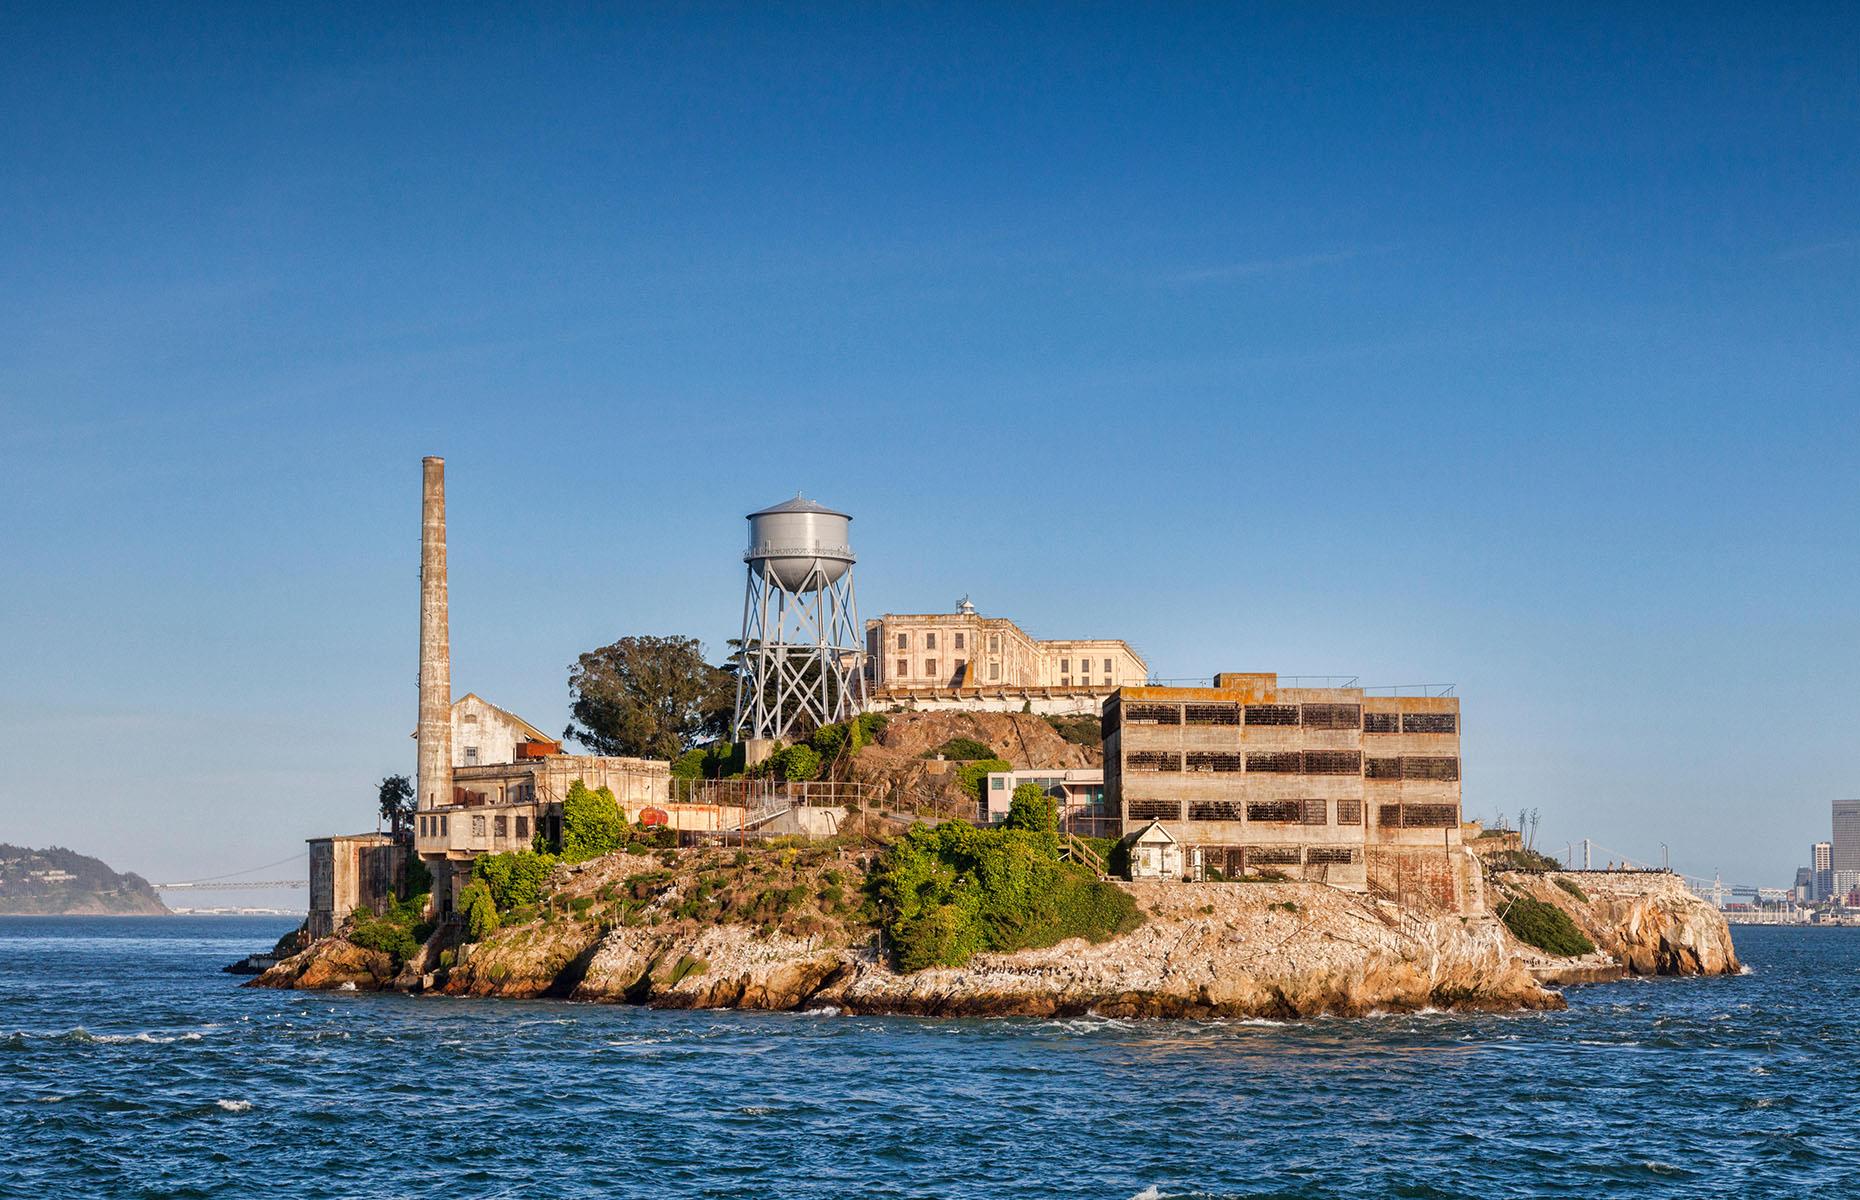 <p>Today Alcatraz is one of California’s – and the USA’s – most popular tourist attractions, with 1.3 million people visiting in 2022. And, happily, it’s being preserved for the future. Announced in 2022, some $35 million (£27.8m) of federal funds have been set aside to make improvements at the NPS site, including improvements to the island’s concrete wharf and its infamous cellhouse.</p>  <p><a href="https://www.loveexploring.com/galleries/198453/the-fascinating-story-and-secrets-of-the-hollywood-sign?page=1"><strong>Read on to learn the fascinating story of the Hollywood Sign</strong></a></p>